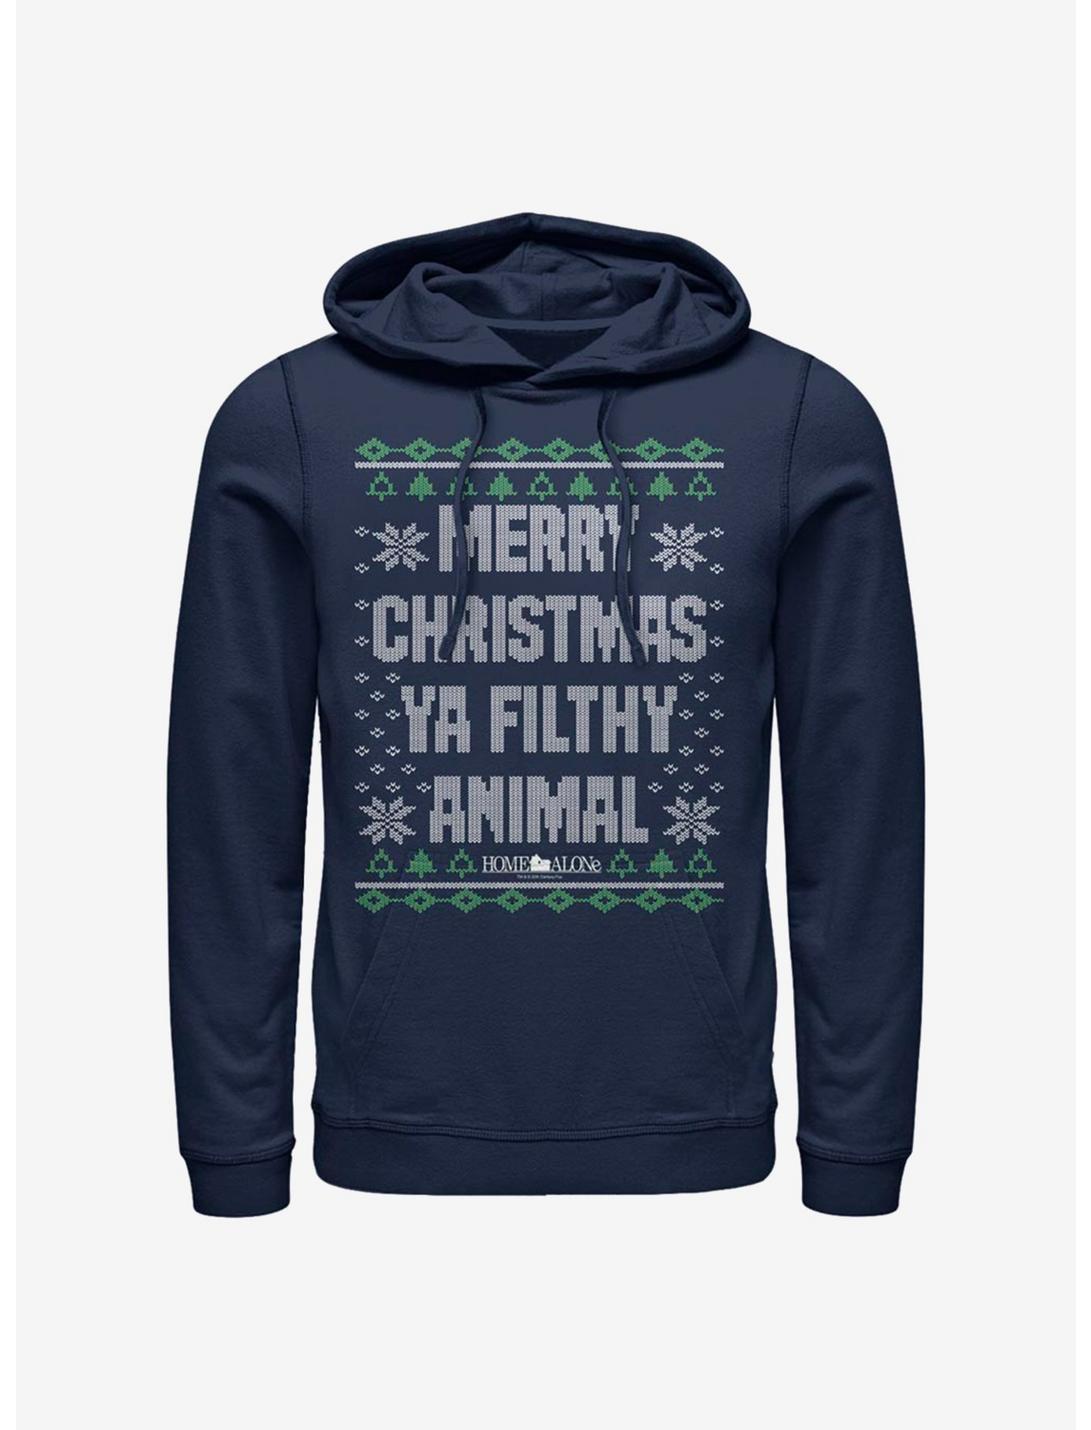 Home Alone Merry Christmas Holiday Sweater Hoodie, NAVY, hi-res